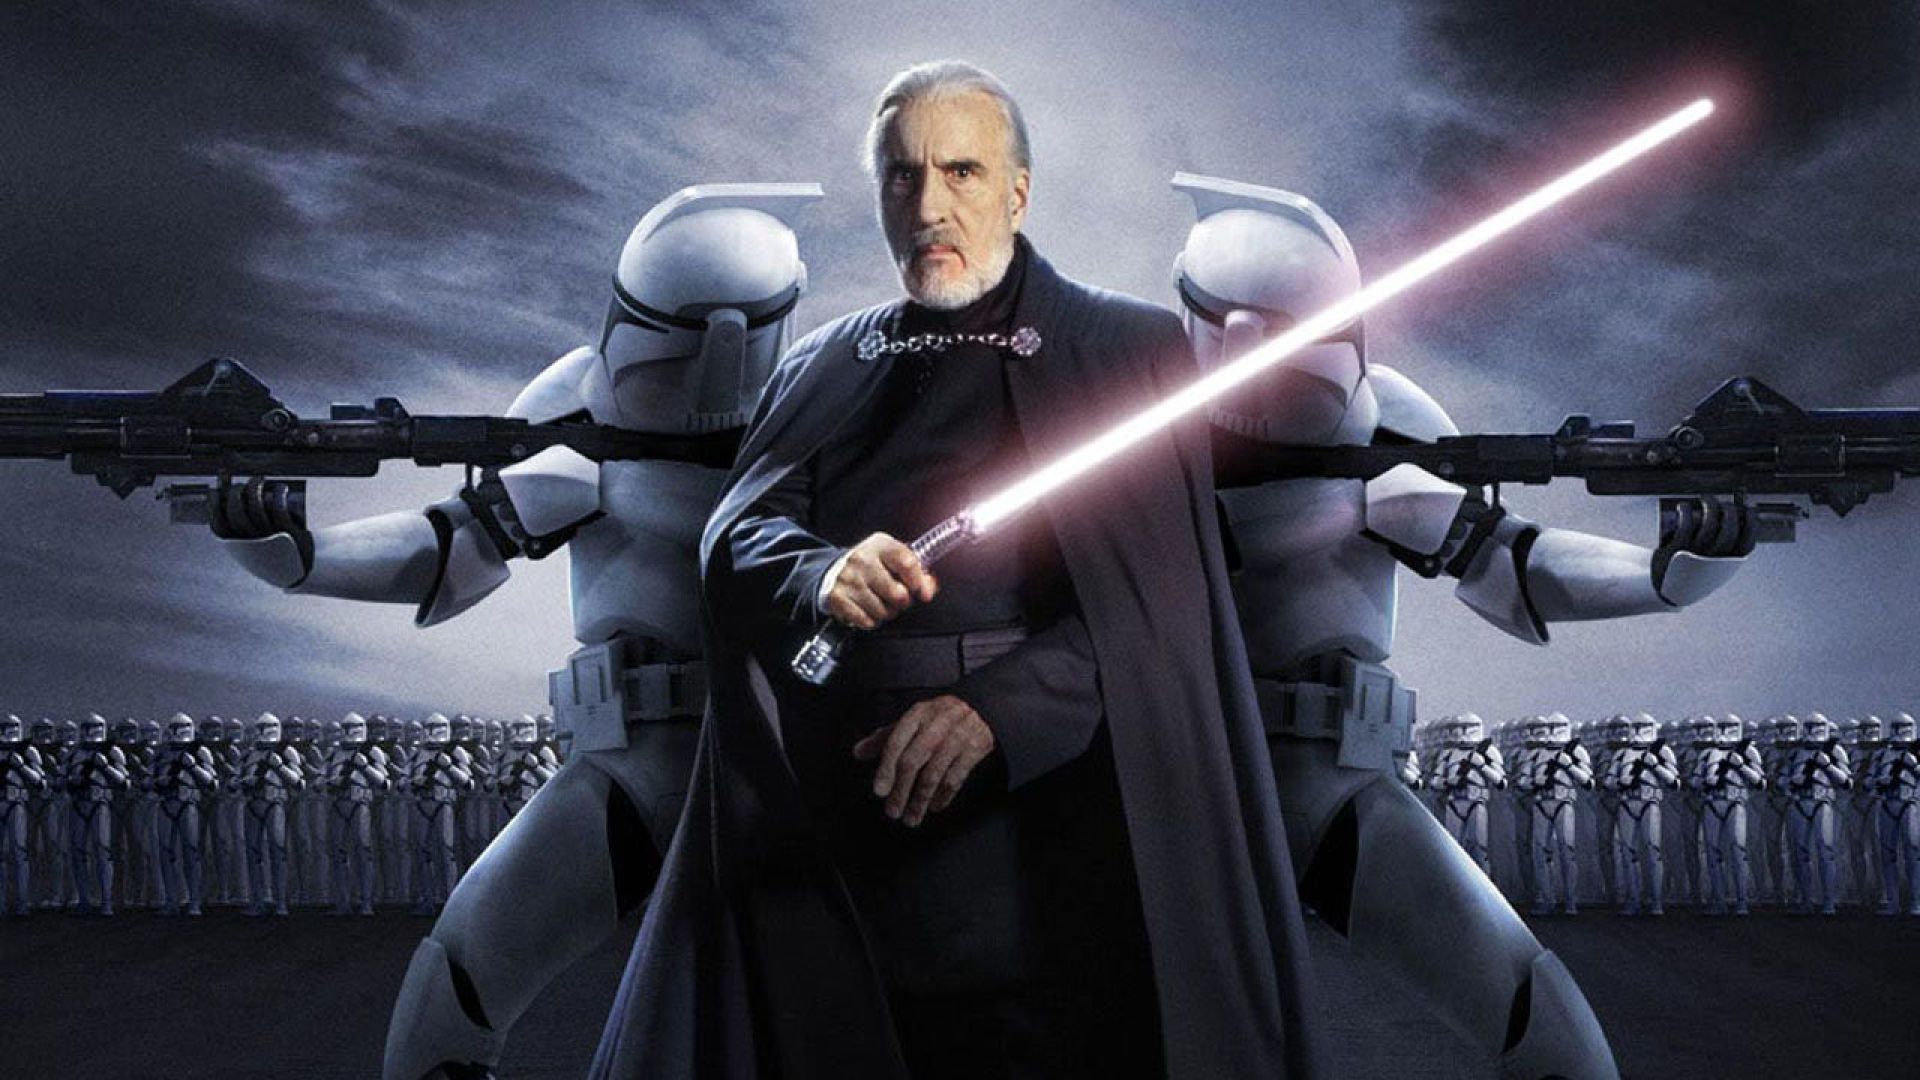 Count Dooku arrives tomorrow at Star Wars Battlefront 2. DEVICENEWS.INFO New York, USA